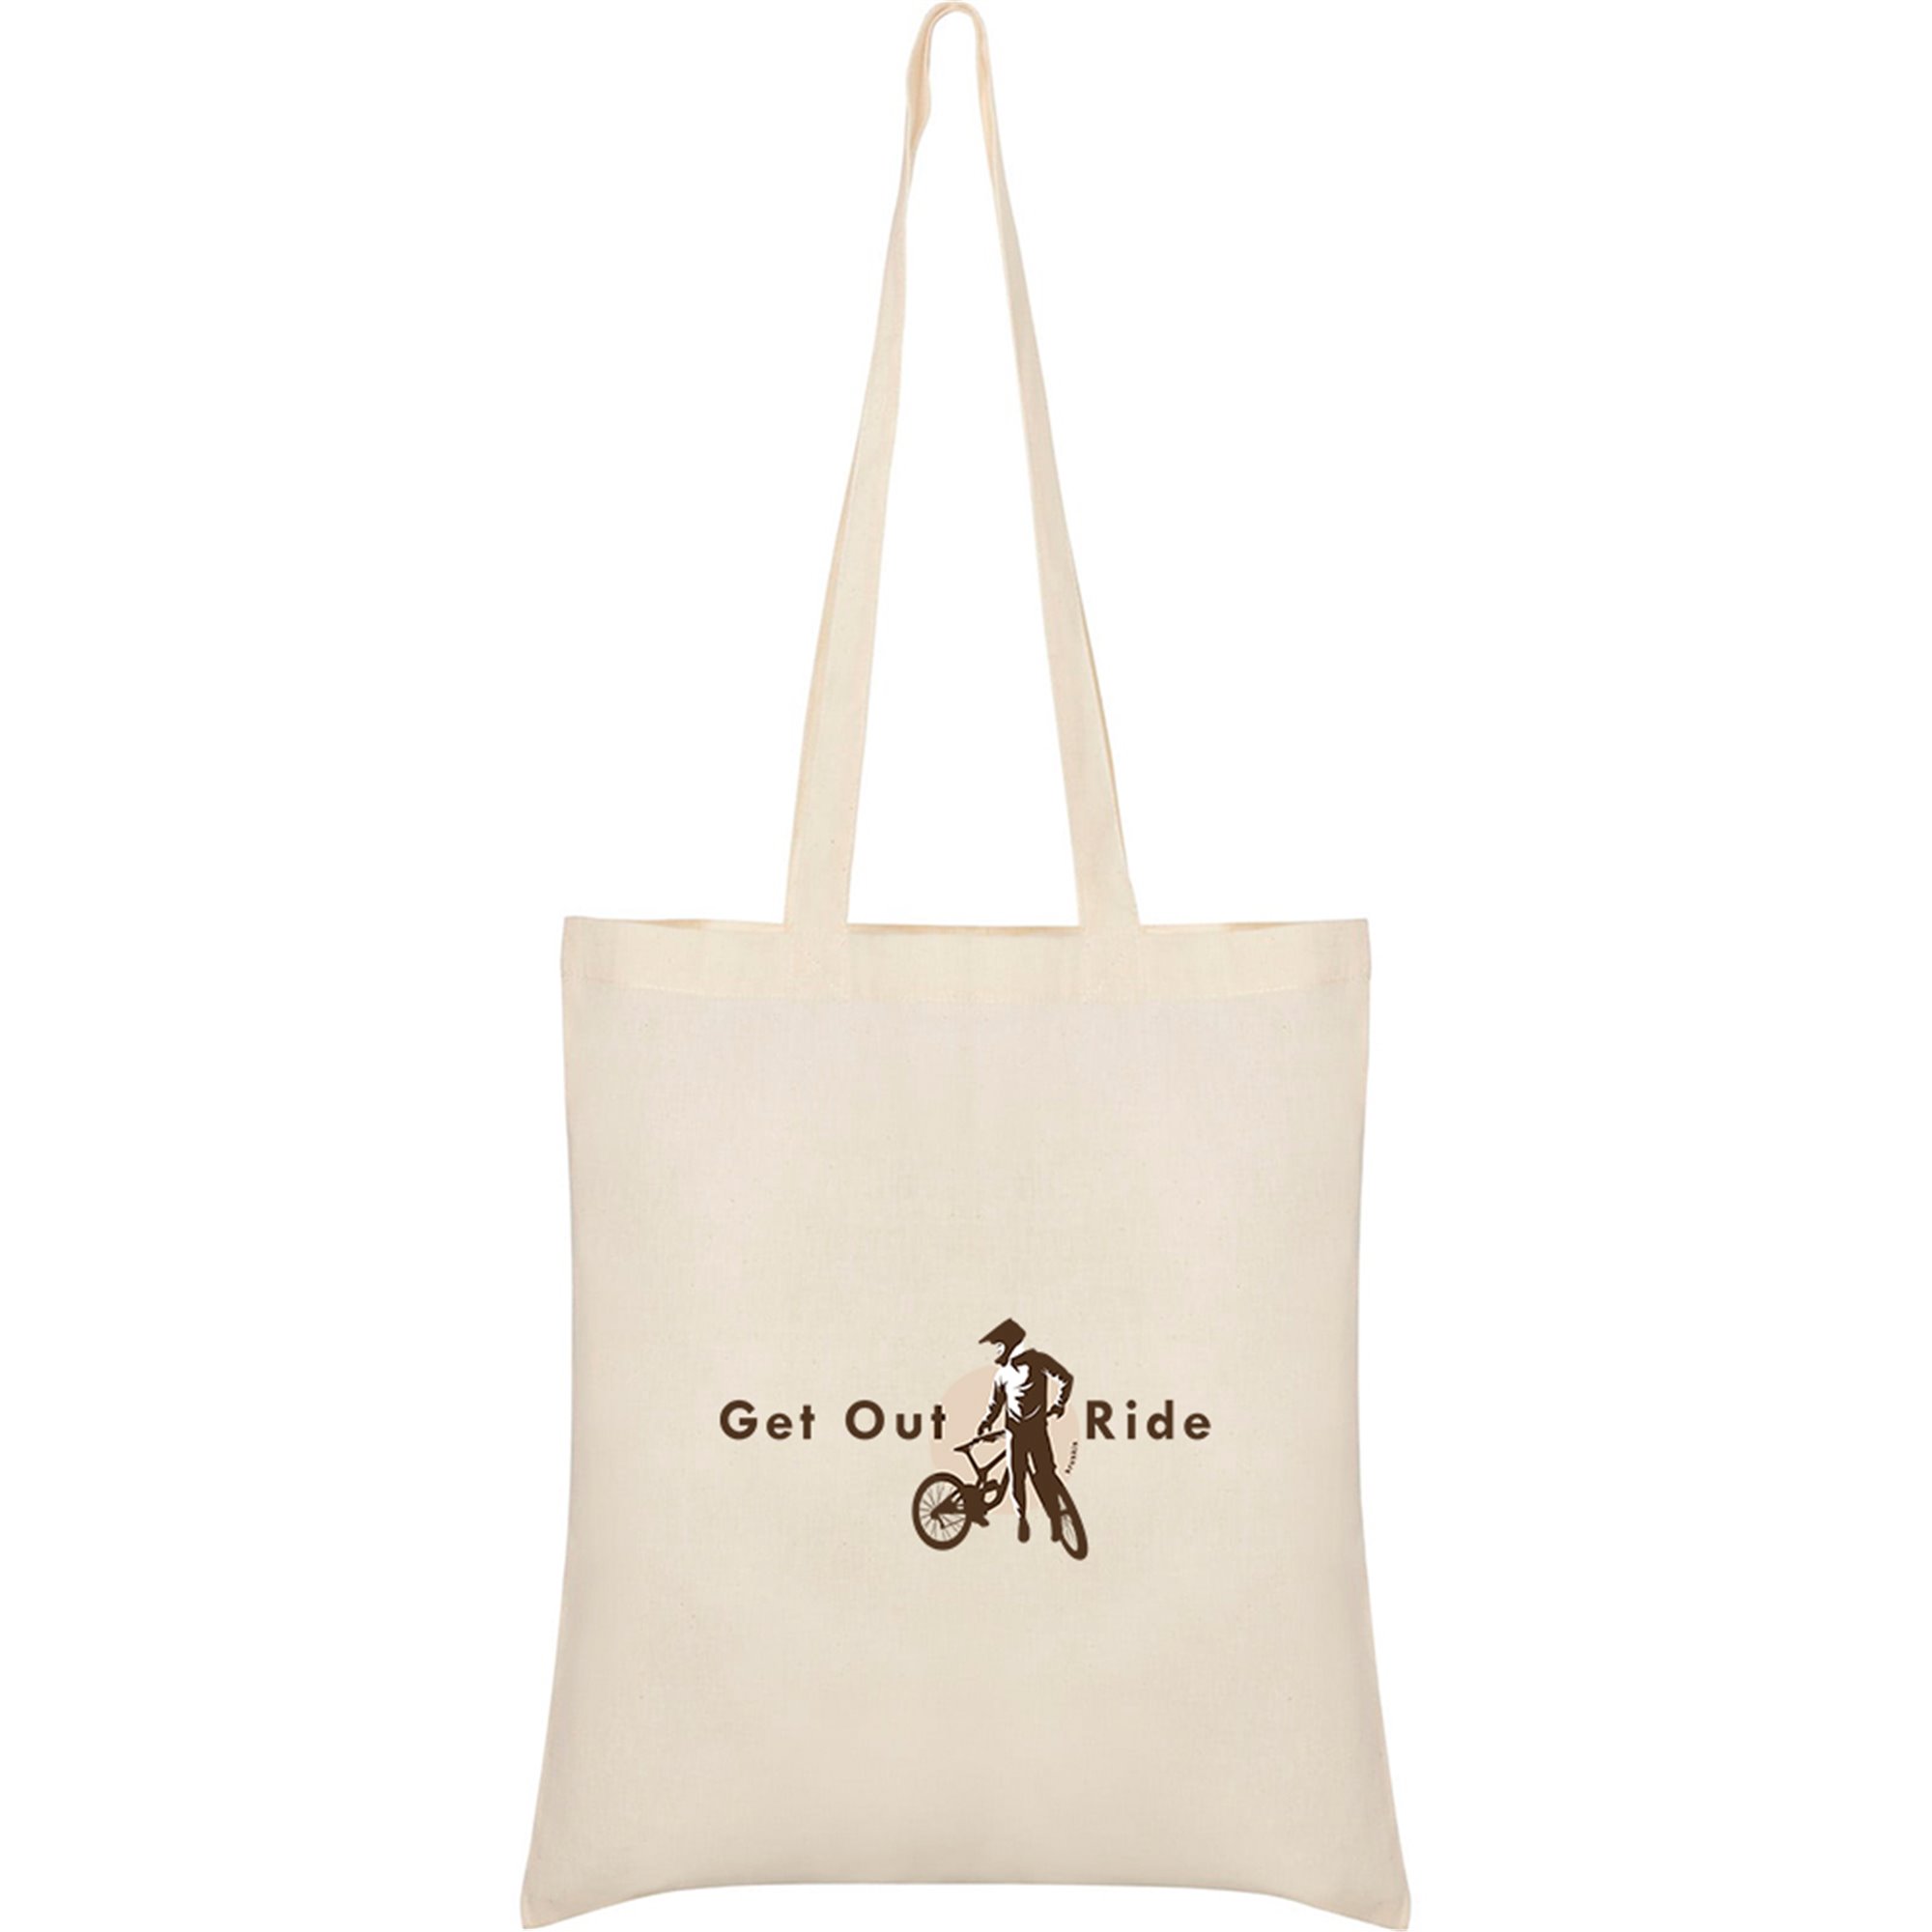 Tasche Baumwolle MTB Get Out and Ride